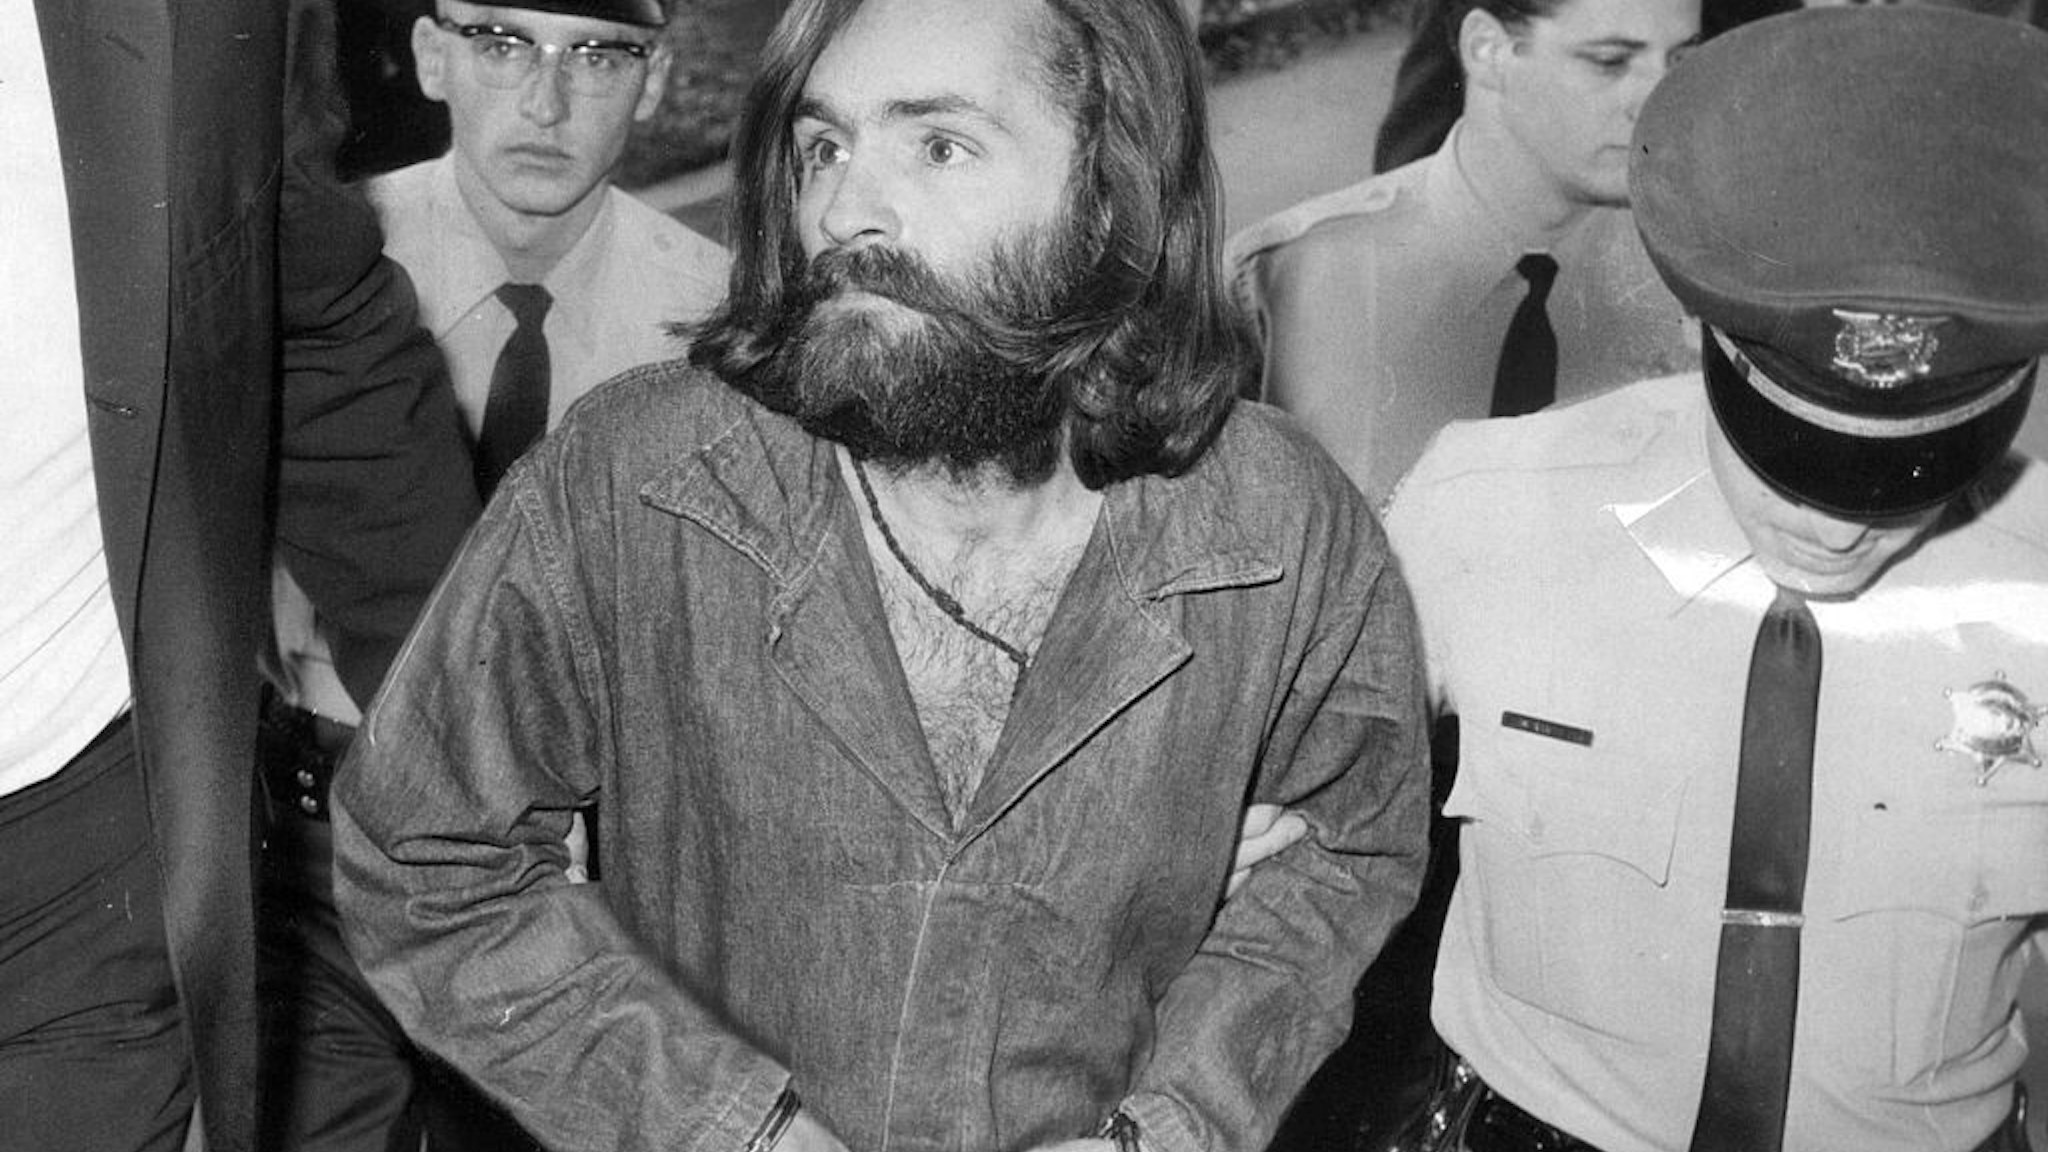 Charles Manson is escorted to court for preliminary hearing on December 3, 1969 in Los Angeles, California.